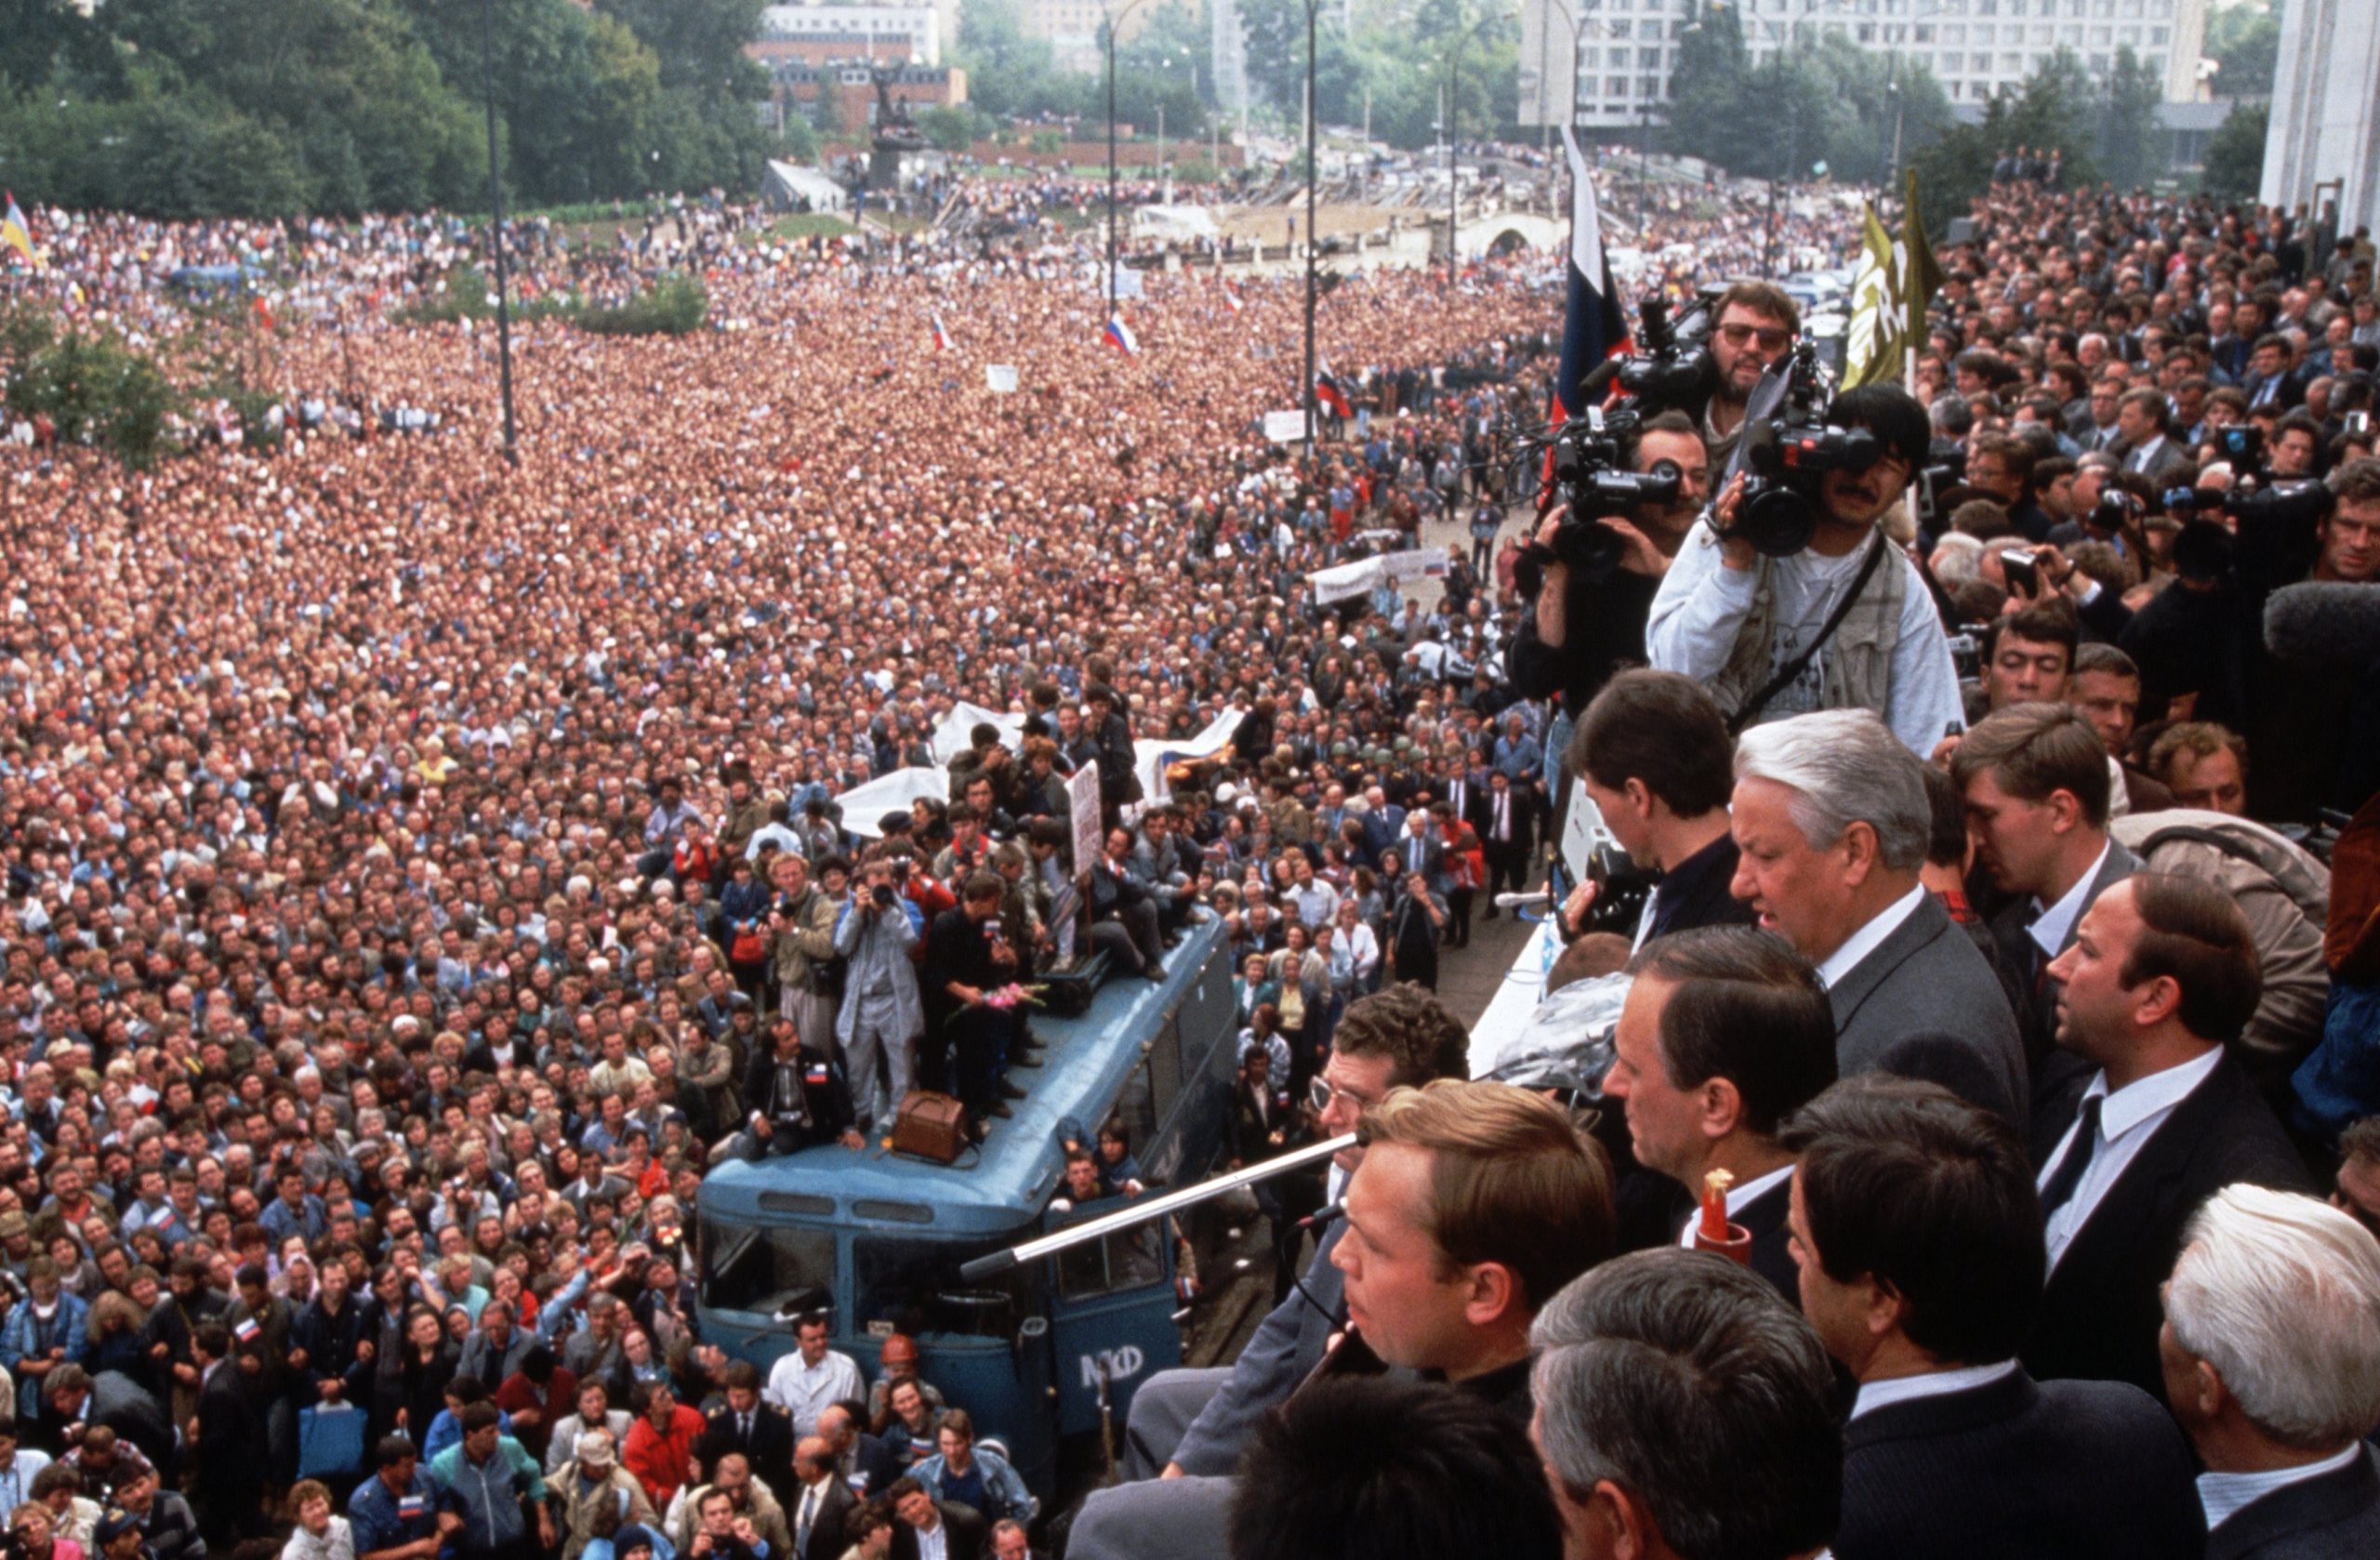 Boris Yeltsin rallies a huge crowd during resistance to the coup. Yet the hope he inspired proved misplaced